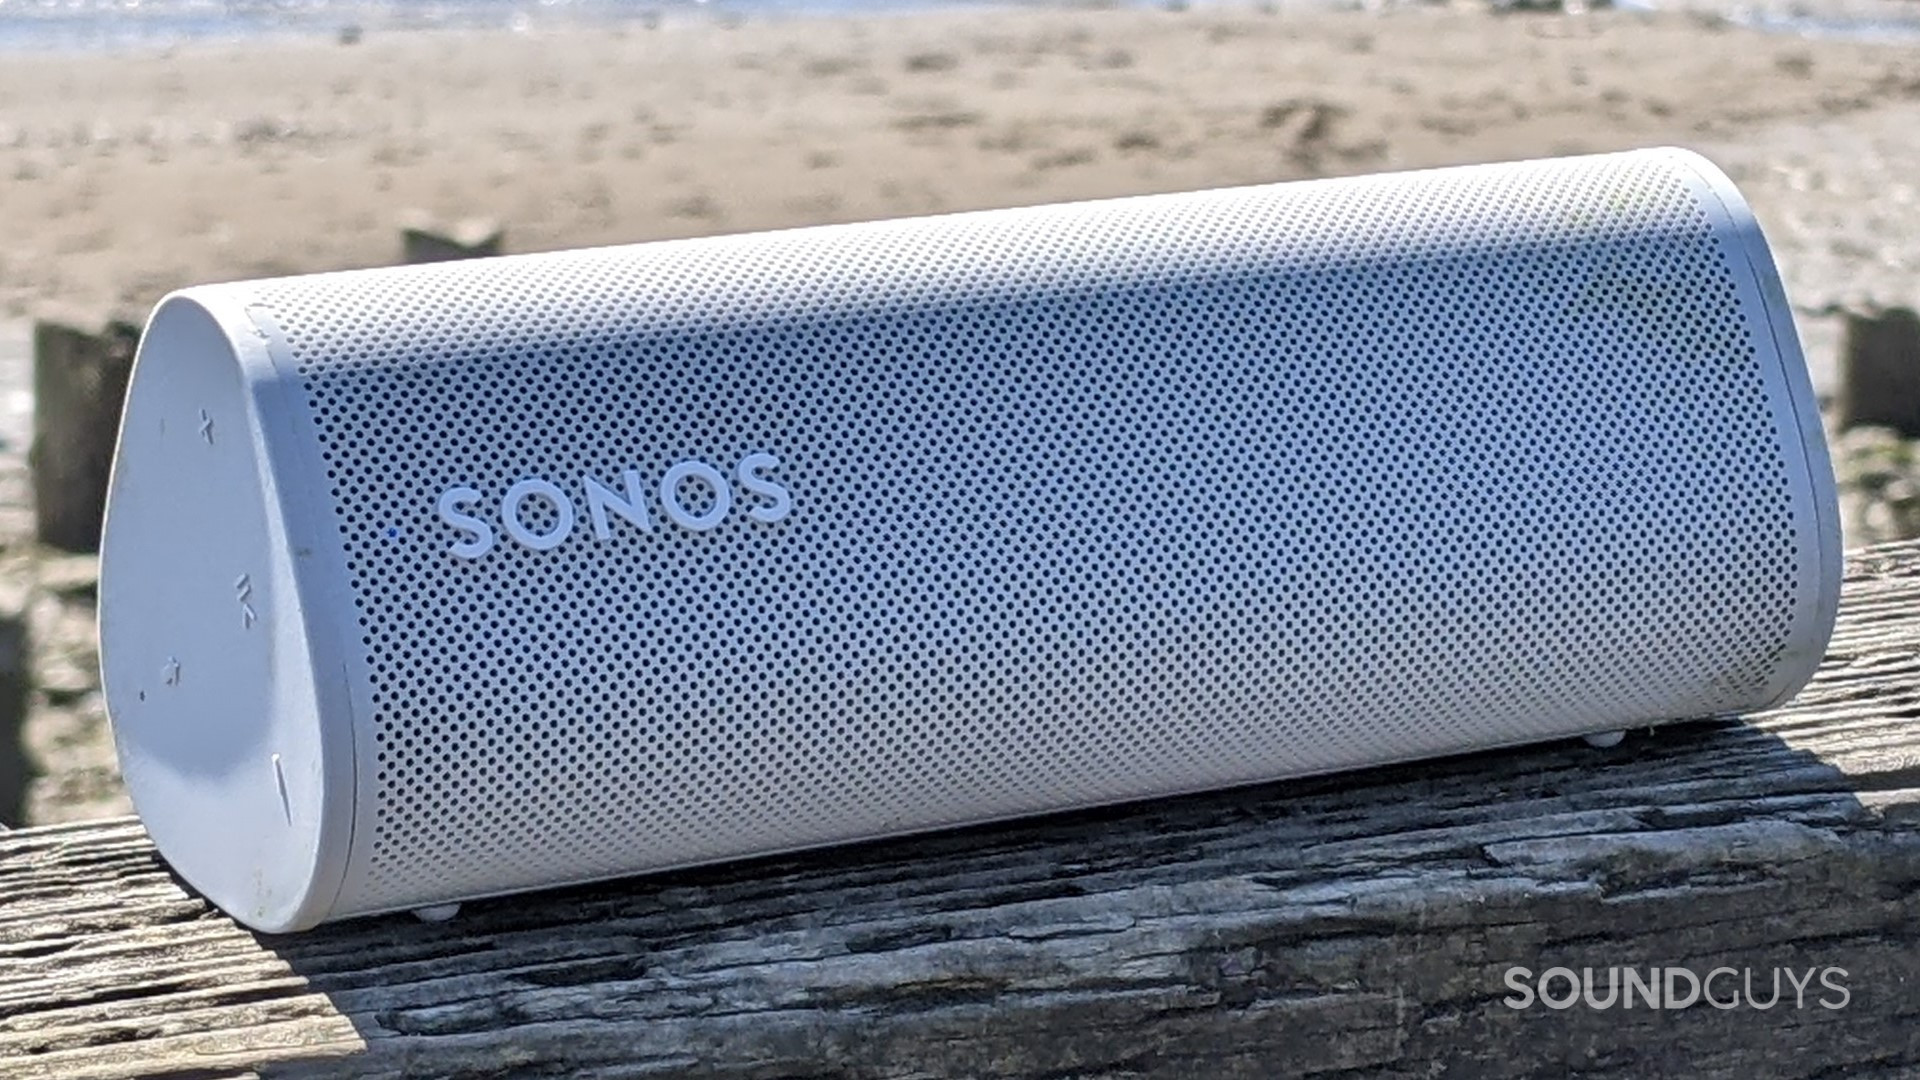 A white Sonos Roam sitting on a wood raining in front of a beach on a sunny day.